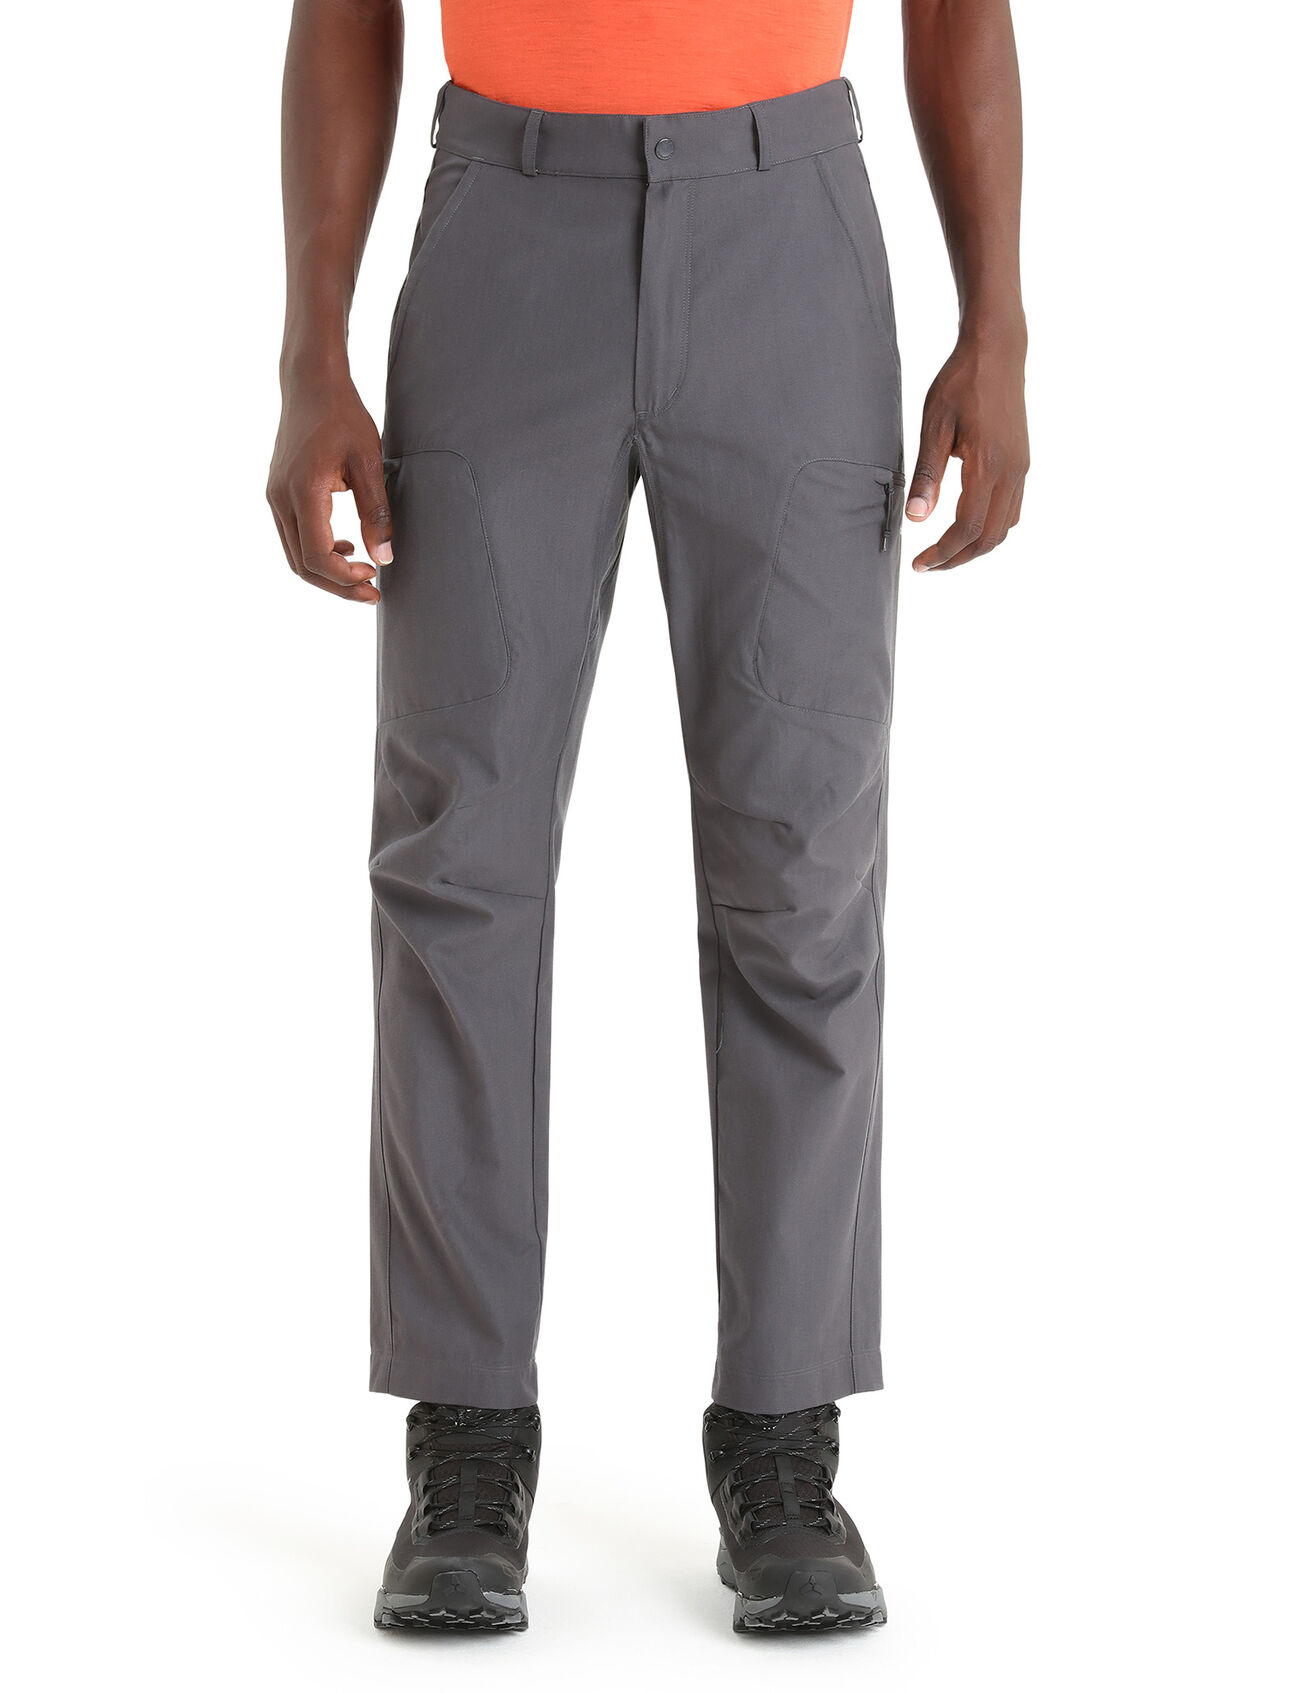 Mens Merino Hike Pants A durable and dependable mountain pant made from a unique blend of merino wool and organically grown cotton, the Hike Pants are perfect for mountain adventures of all kinds.